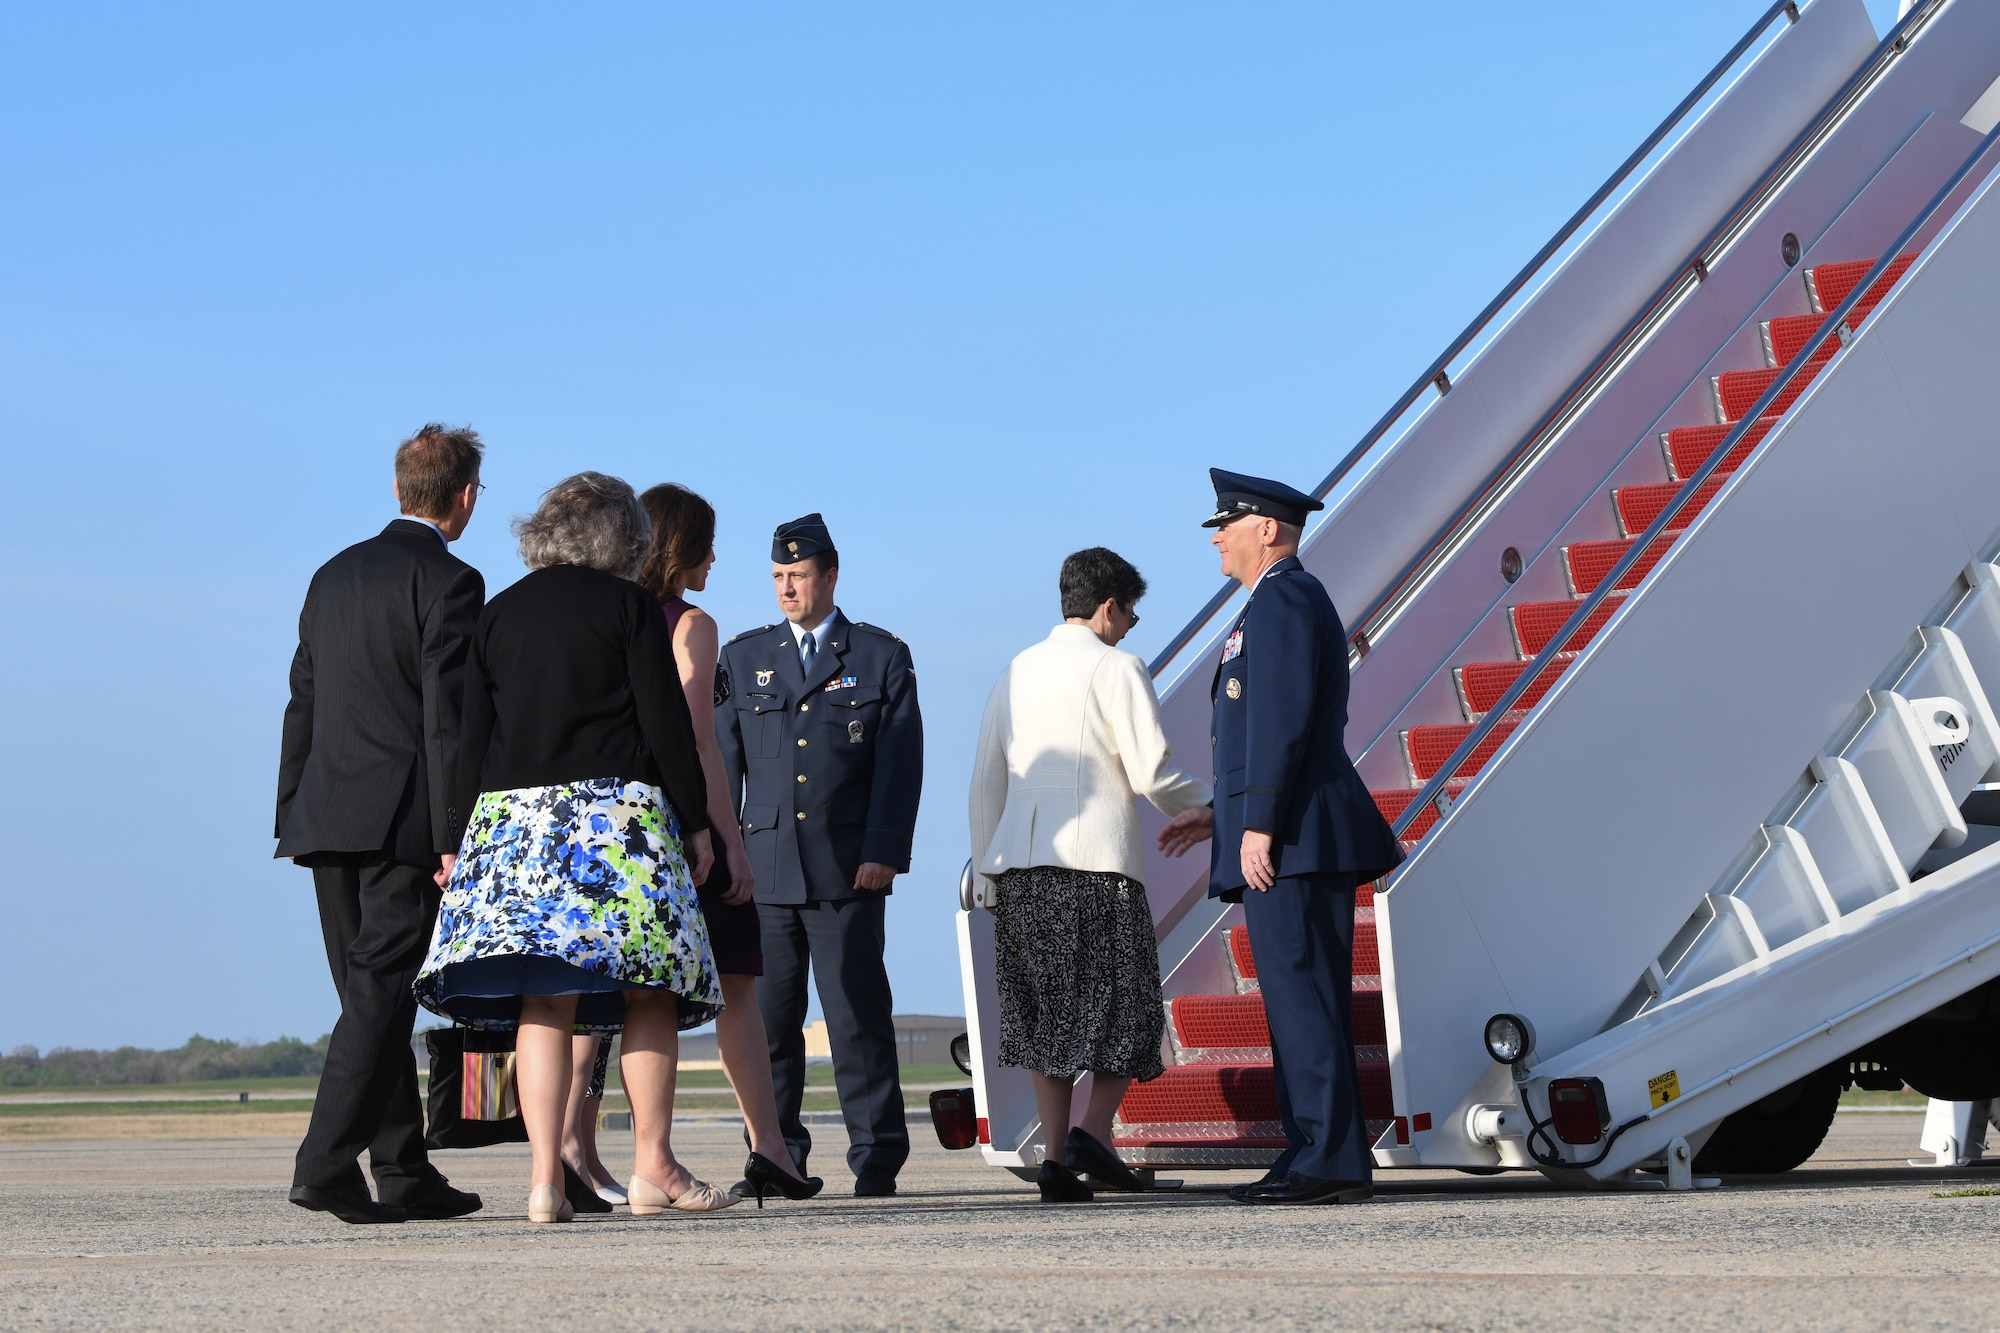 Col. Tyler Schaff, 316th Wing and Joint Base Andrews installation commander, right, greets distinguished guests during the dignified transfer of Brigadier Gen. František Moravec at Joint Base Andrews, Md., April 25, 2022.